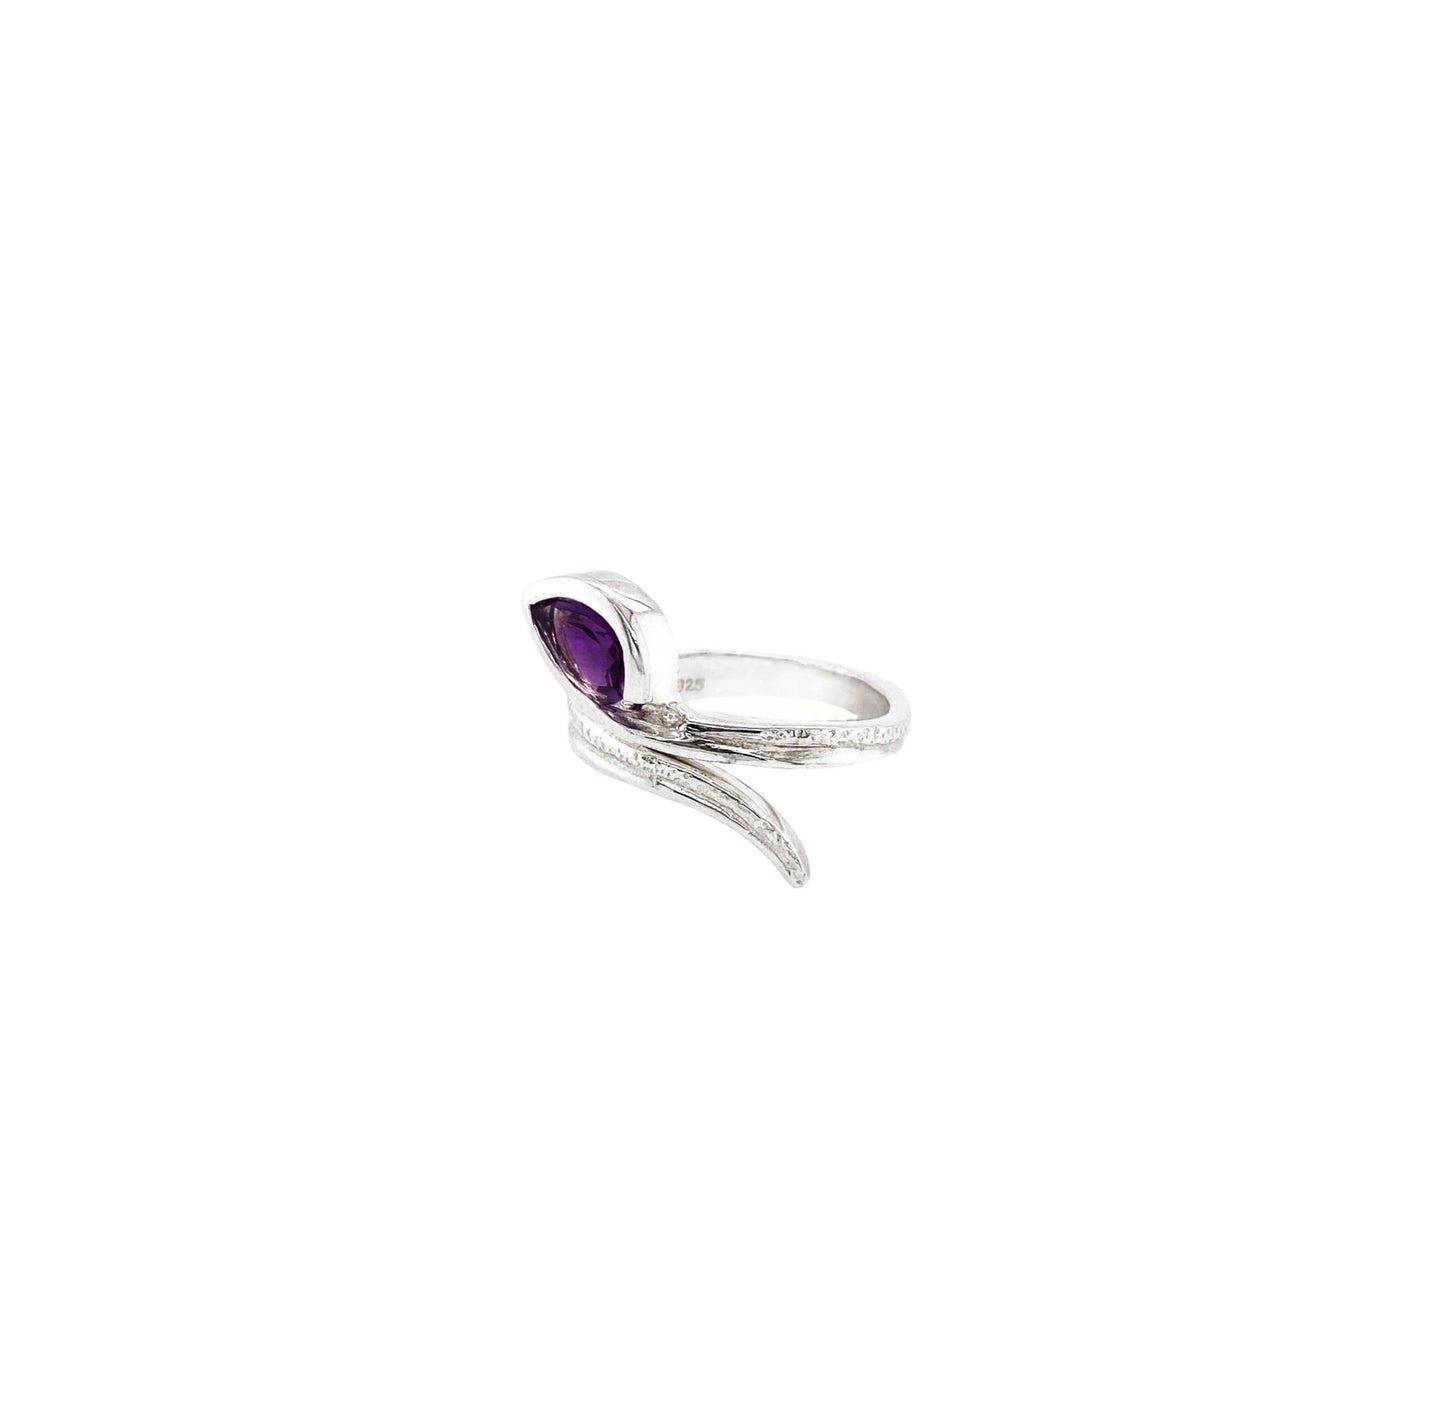 Amethyst Sterling Silver Ring - Twisted Earth Artistry